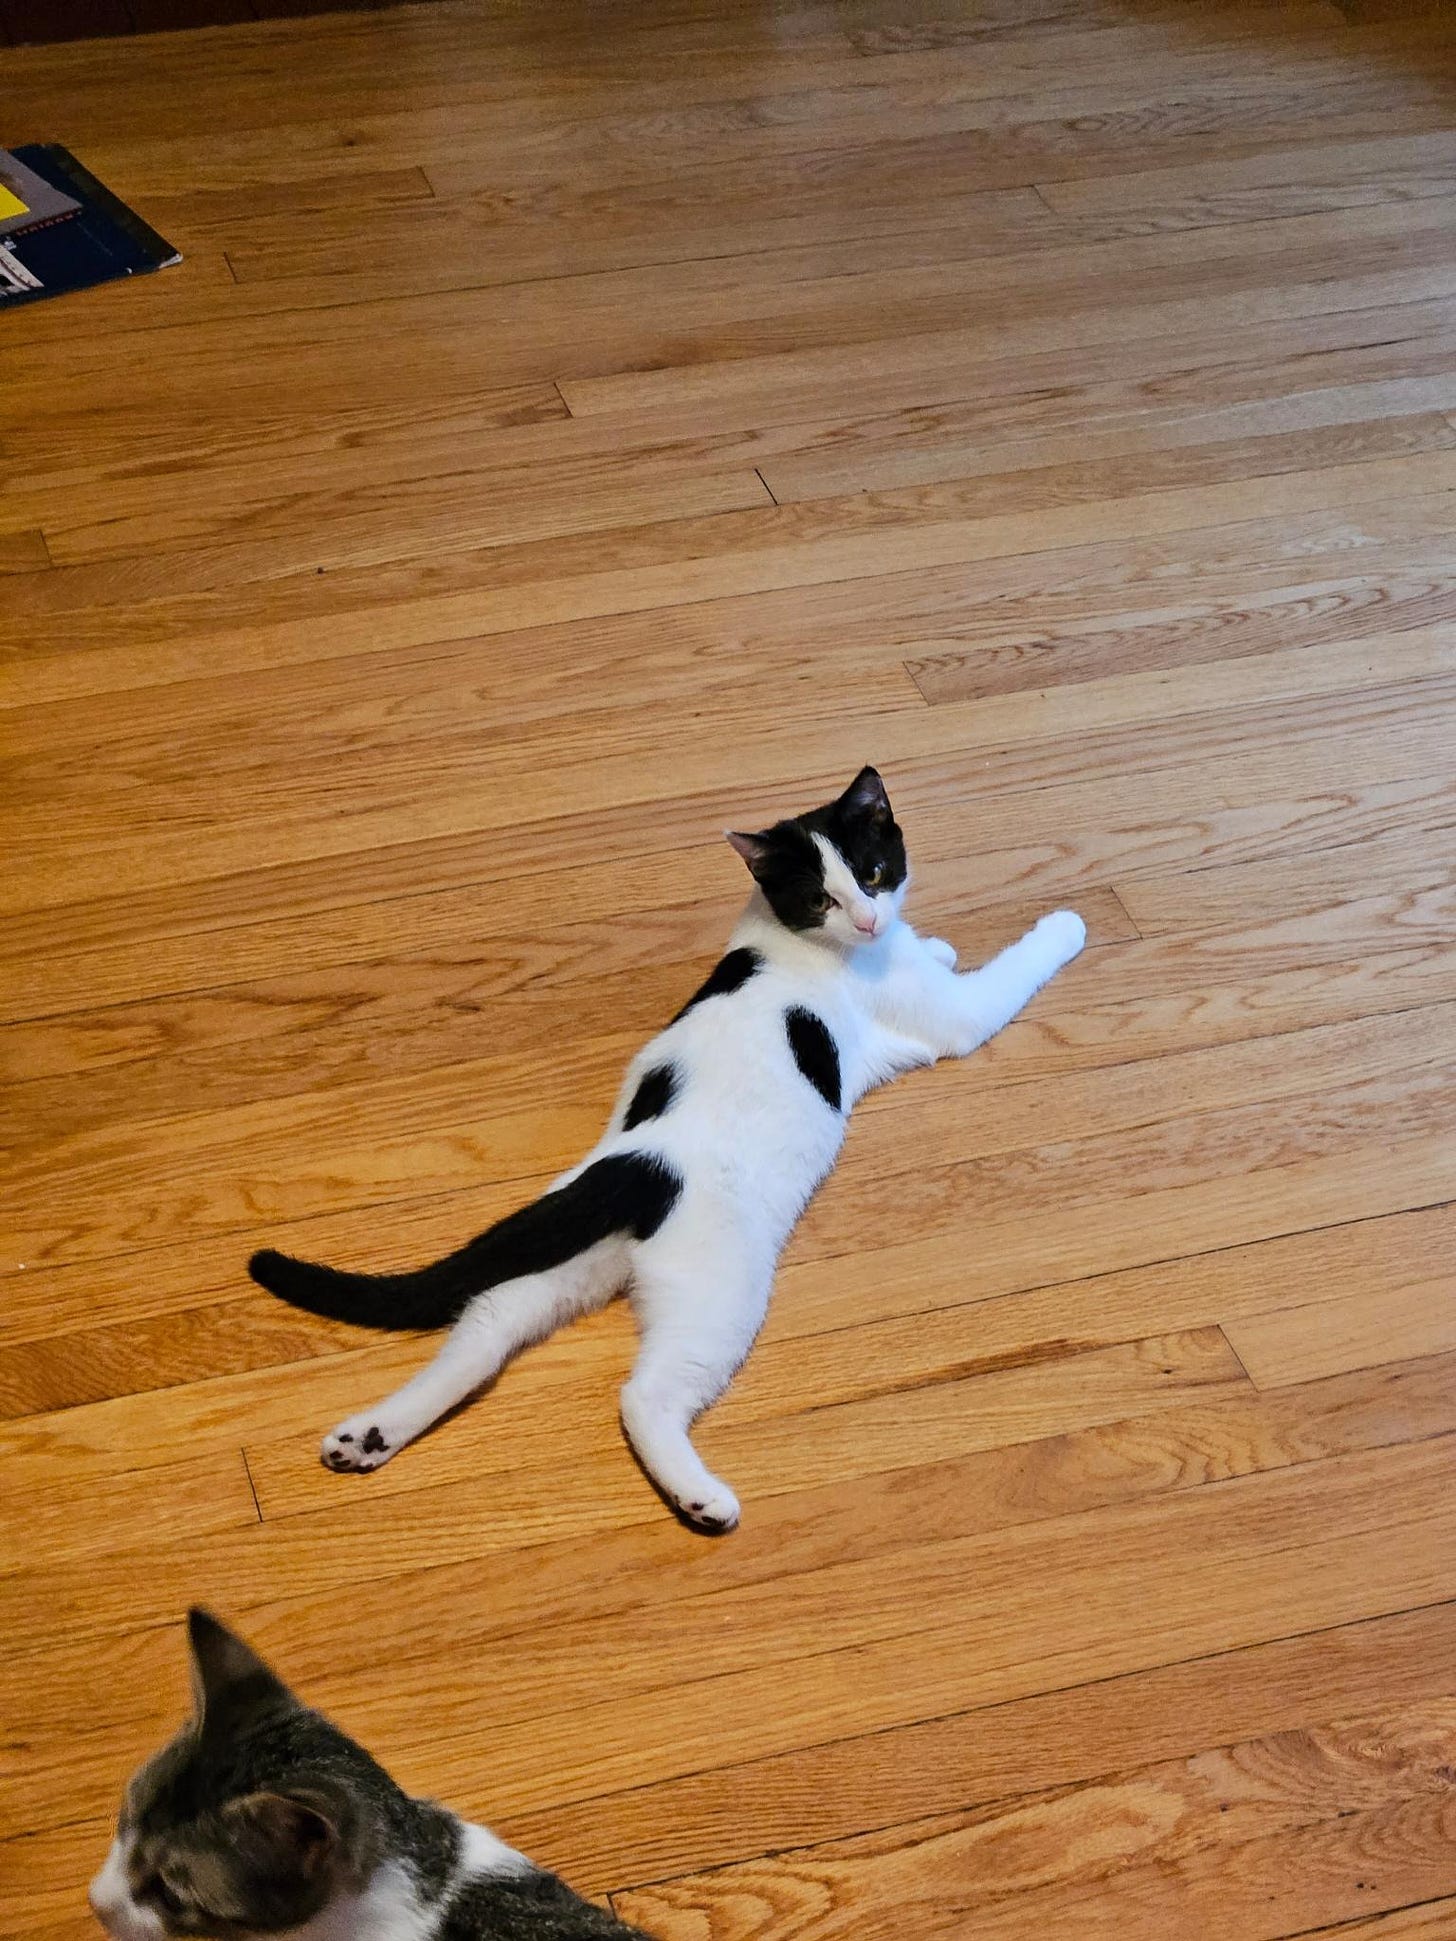 A cow looking cat laying down completely sprawled out